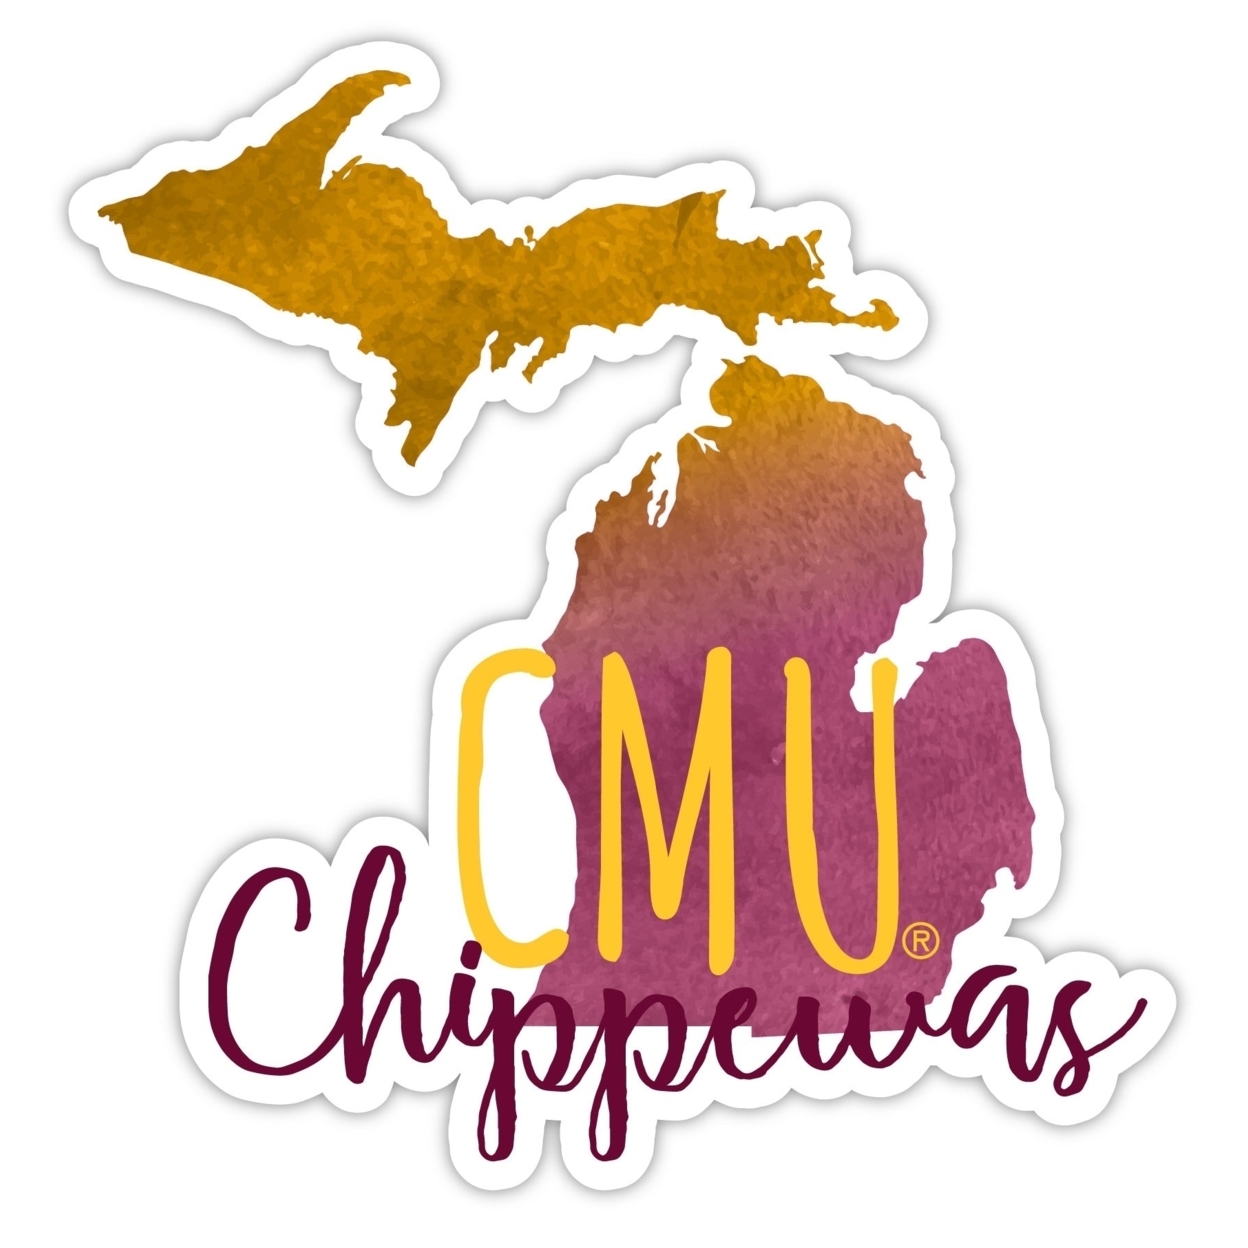 Central Michigan University Watercolor State Die Cut Decal 2-Inch